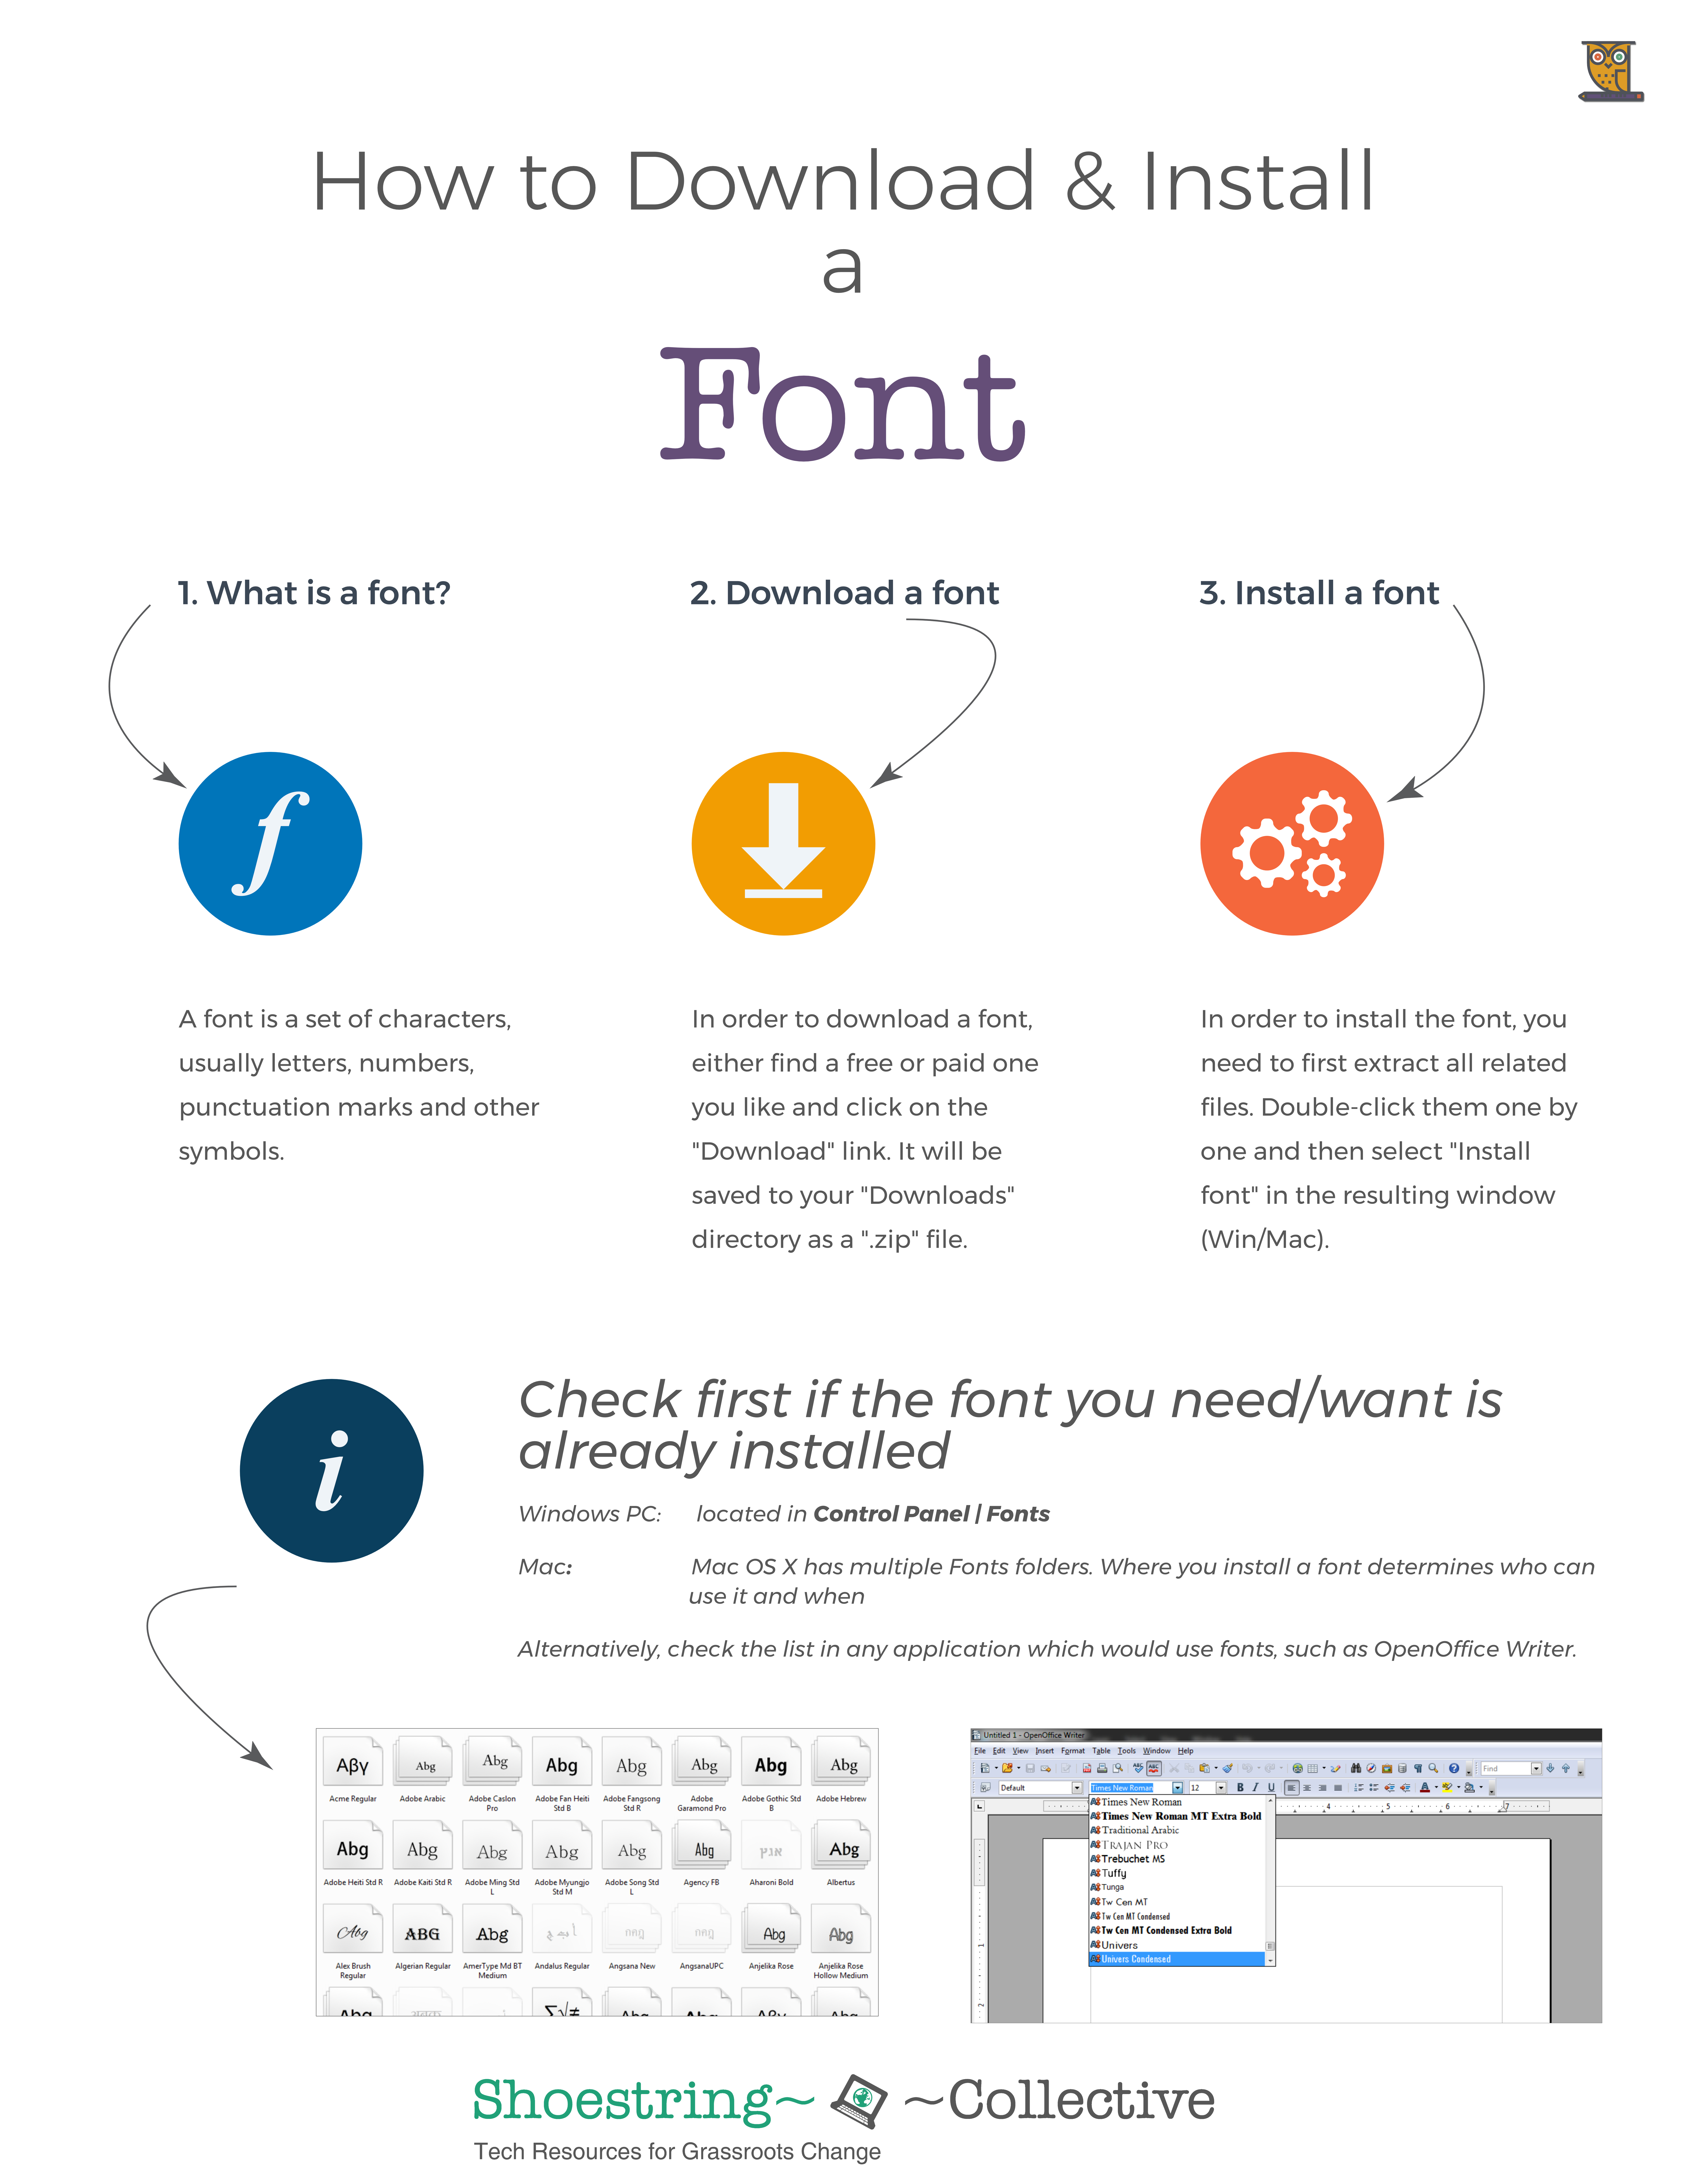 How to Install a Font